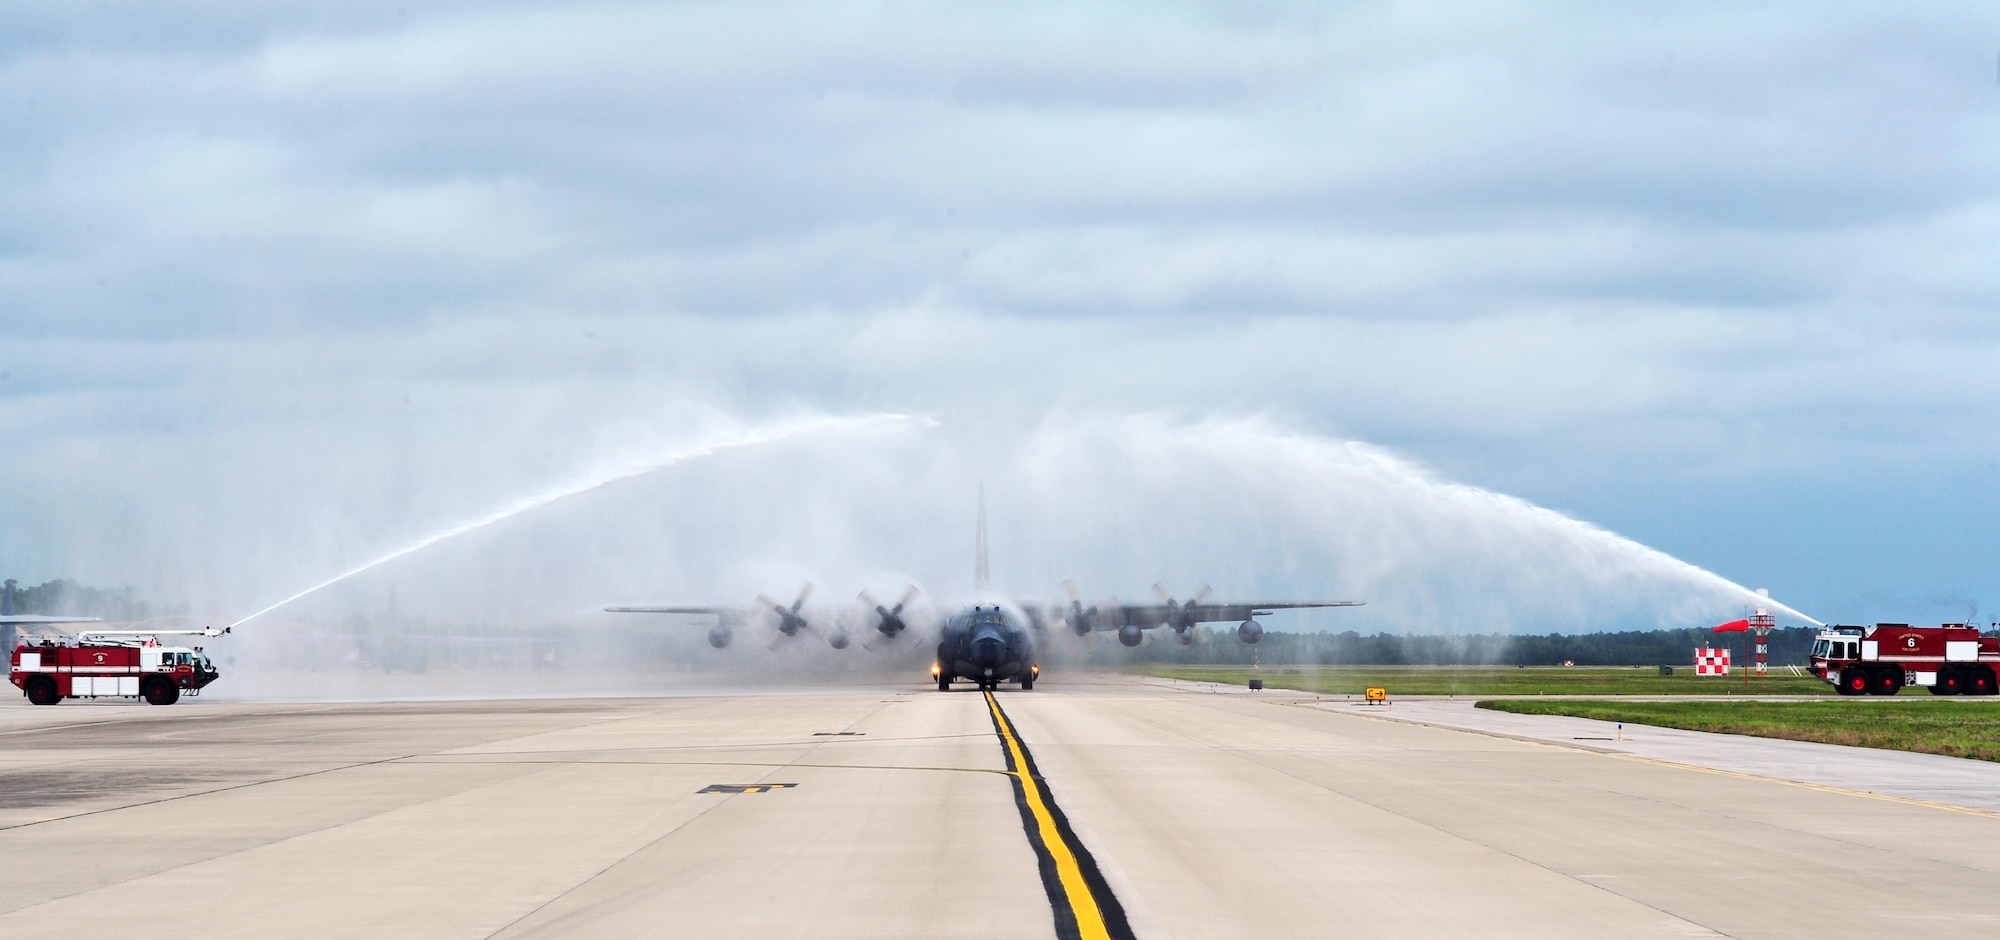 Fire trucks spray water over an MC-130P Combat Shadow after its final flight, May 15, 2015, at Hurlburt Field, Fla. The final two MC-130P Combat Shadow aircraft in the Air Force landed for the last time at Hurlburt Field, Fla., in front of more than 400 people and will take their last flight to the boneyard at Davis-Monthan Air Force Base, Arizona, June 1. (U.S. Air Force photo/Airman 1st Class Ryan Conroy) 